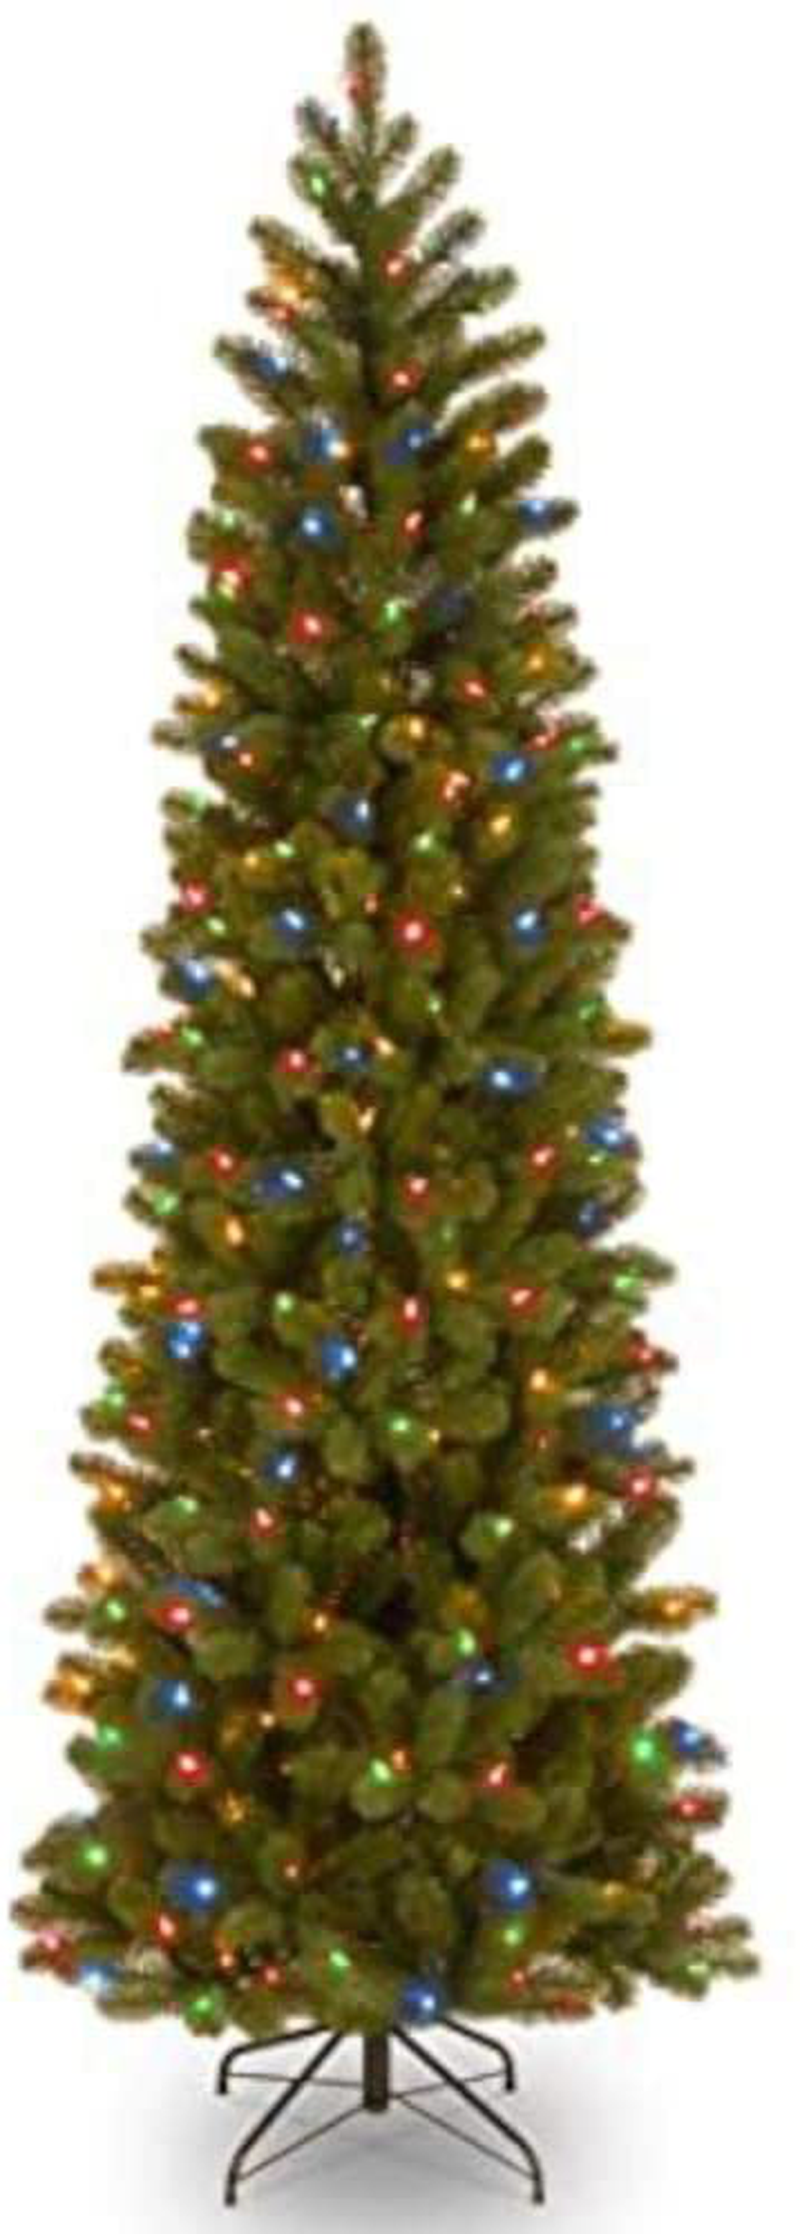 National Tree Company 'Feel Real lit Artificial Christmas Tree Includes Pre-Strung Multi-Color LED Lights, Memory Shape and Stand, 7.5 ft, Downswept Douglas Fir Slim Slim